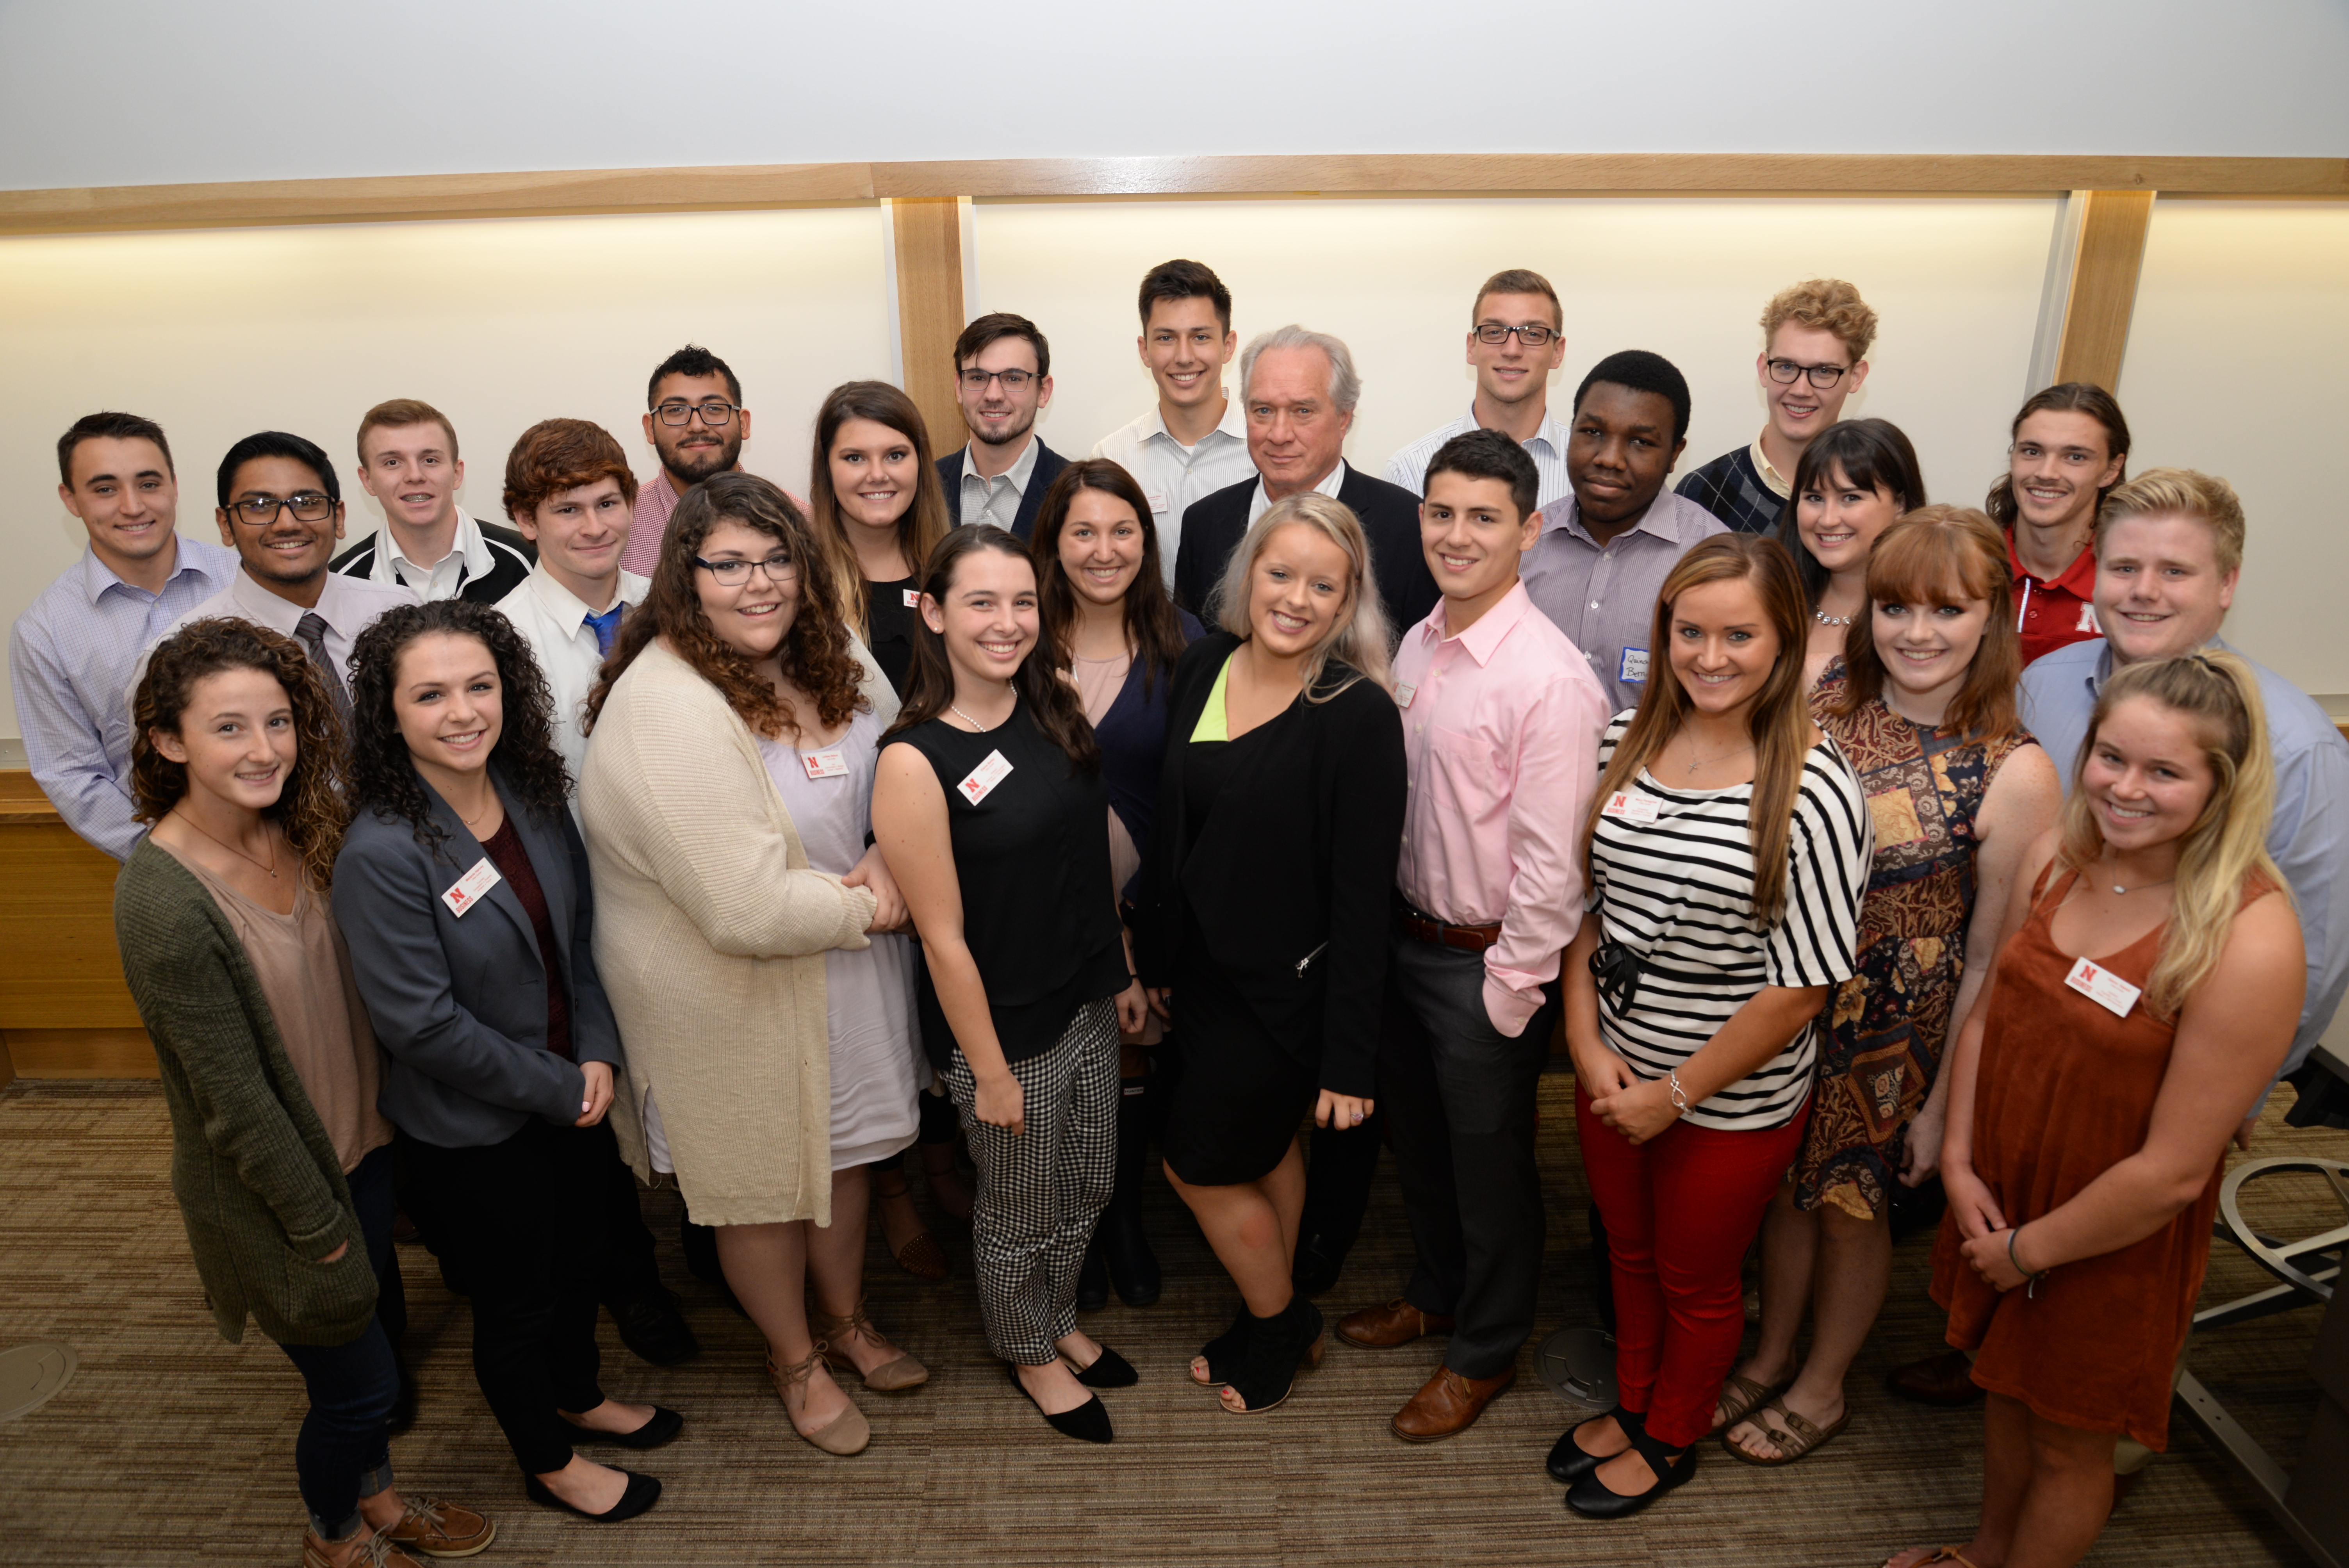 Second Cohort of Clifton Builders with Gallup Chairman and CEO Jim Clifton (center, middle row).